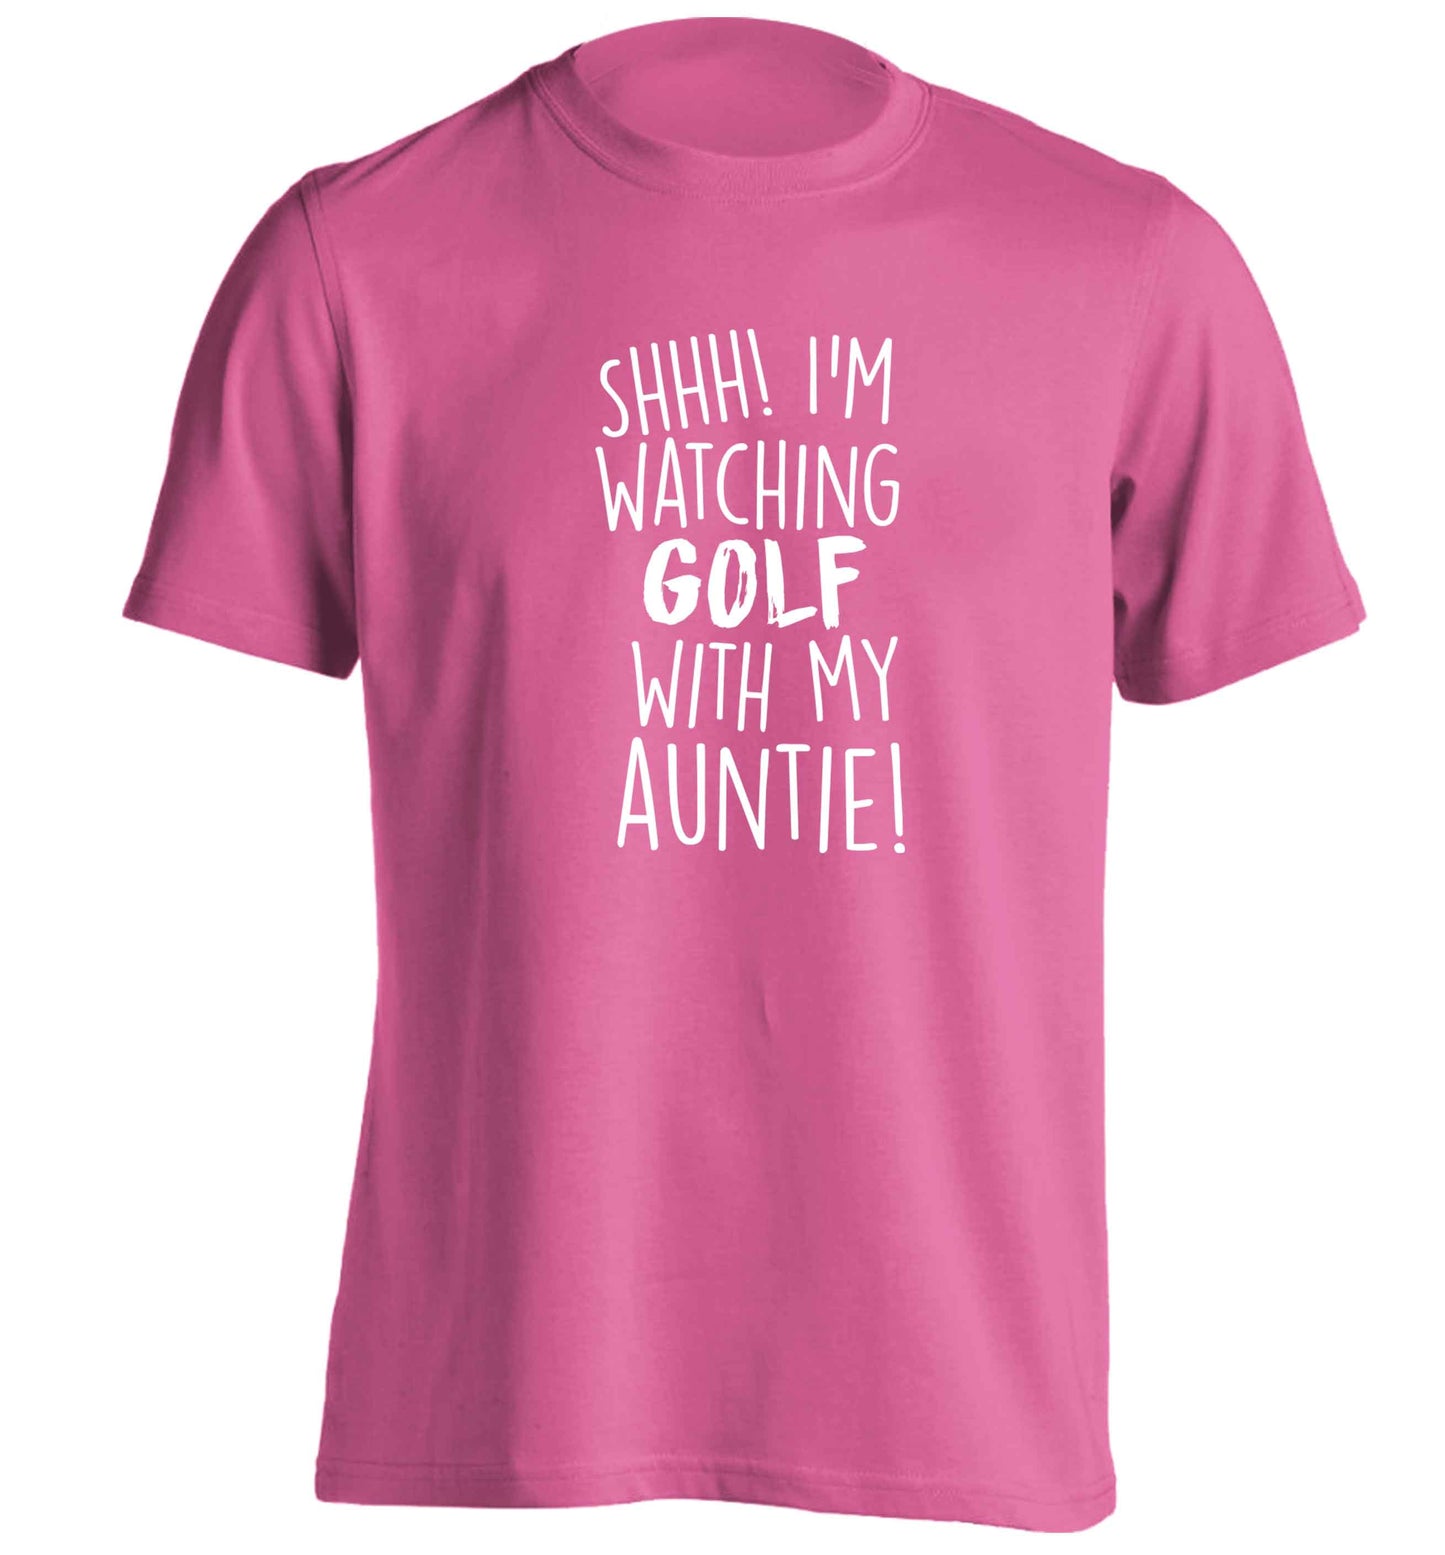 Shh I'm watching golf with my auntie adults unisex pink Tshirt 2XL